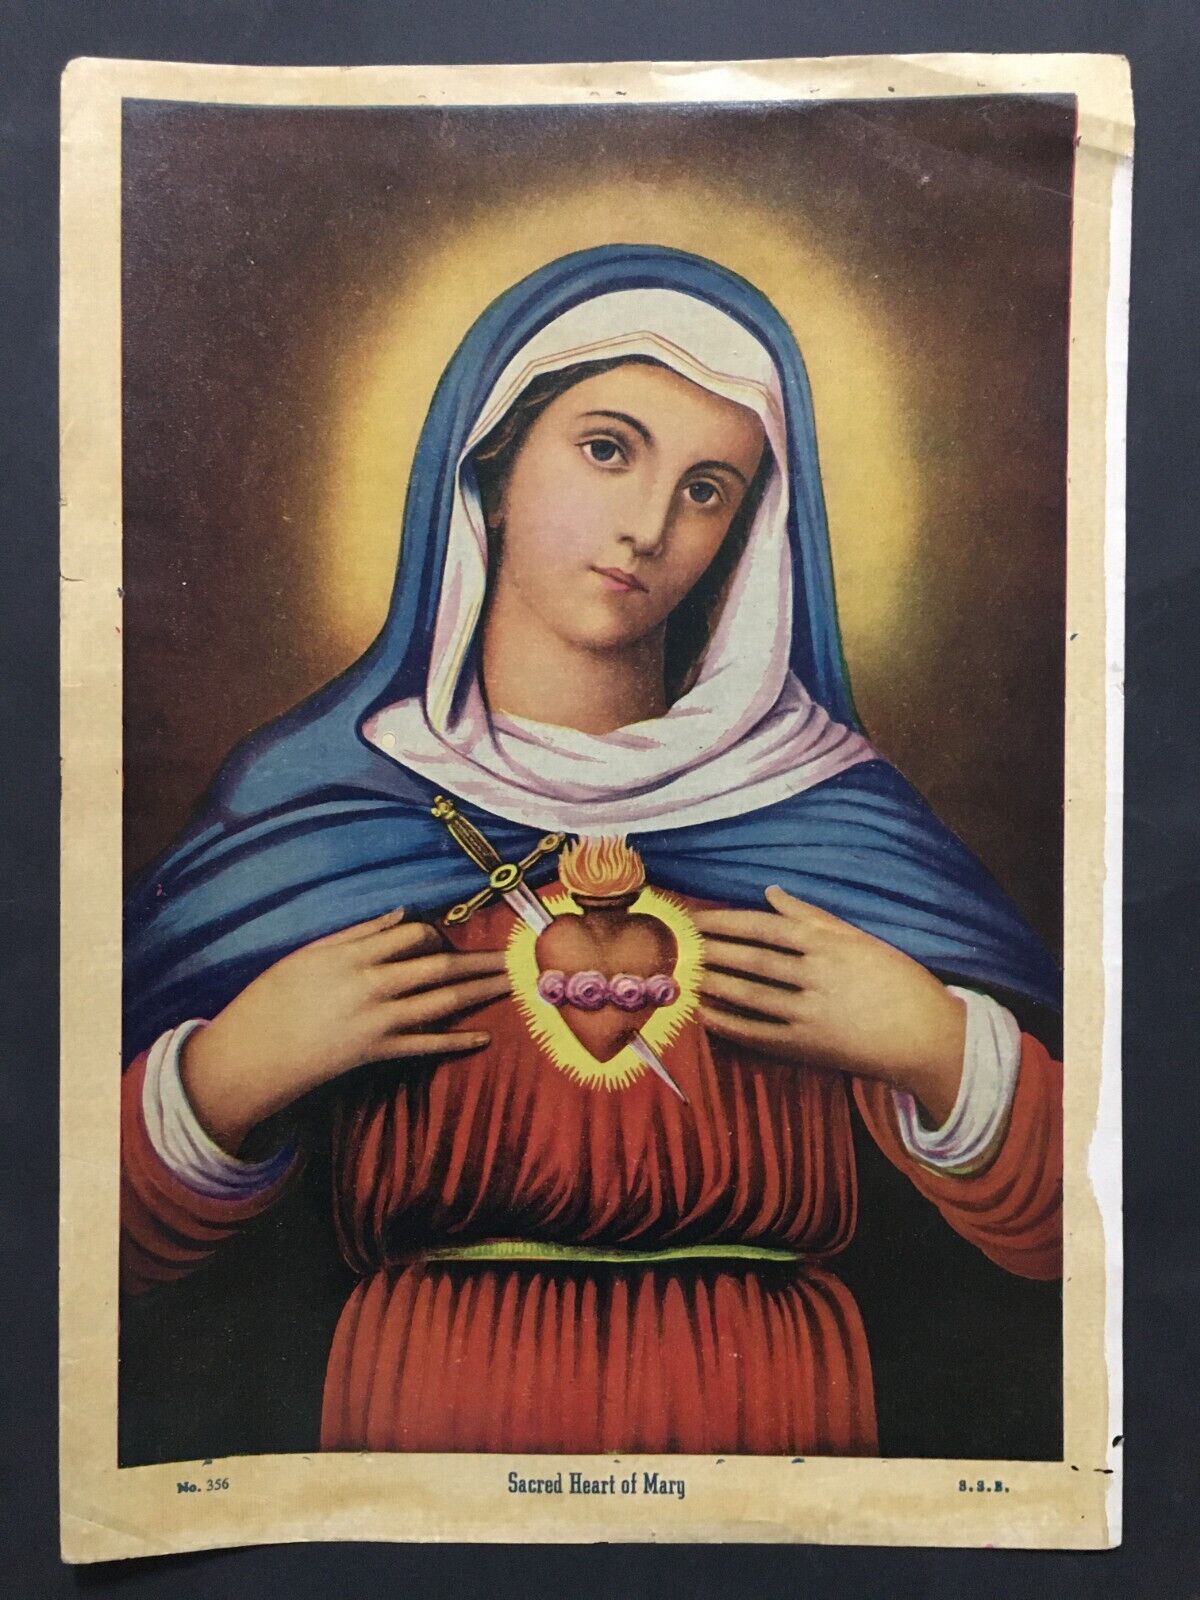 India 50's Vintage Print SACRED HEART OF MARY 10in x 14in (11812)